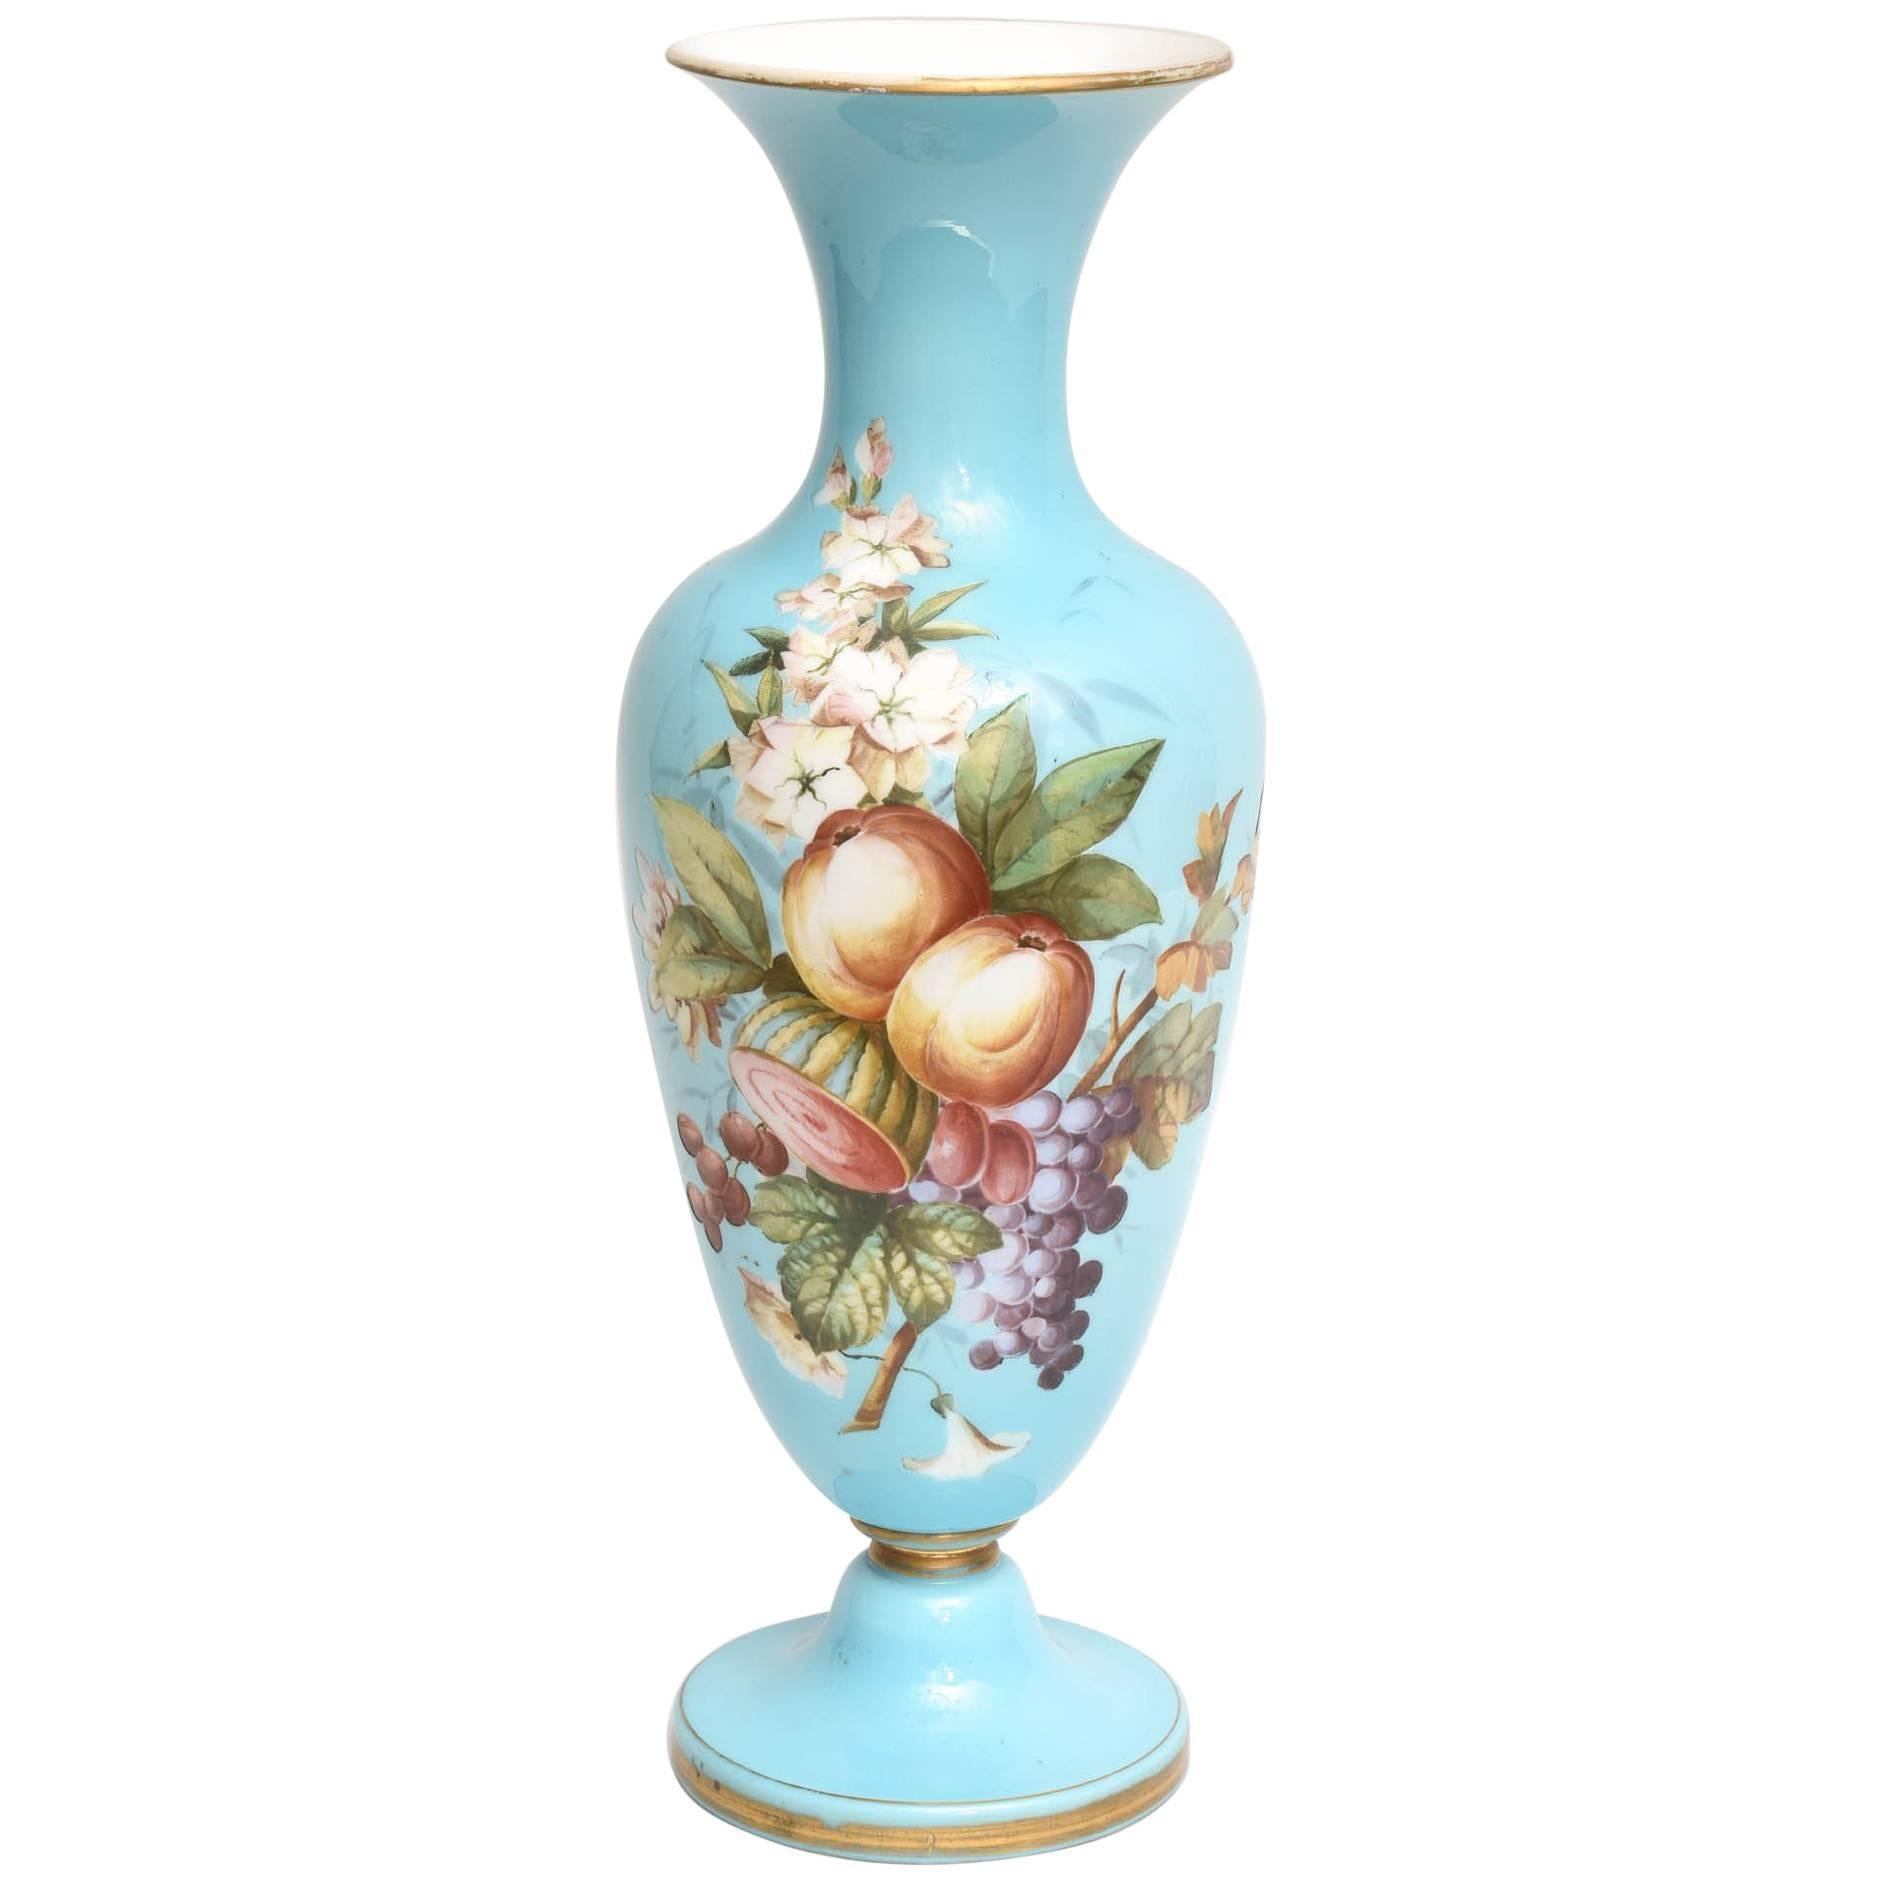 Tall Opaline Glass Vase with Hand-Painted Florals, Attributed to Baccarat